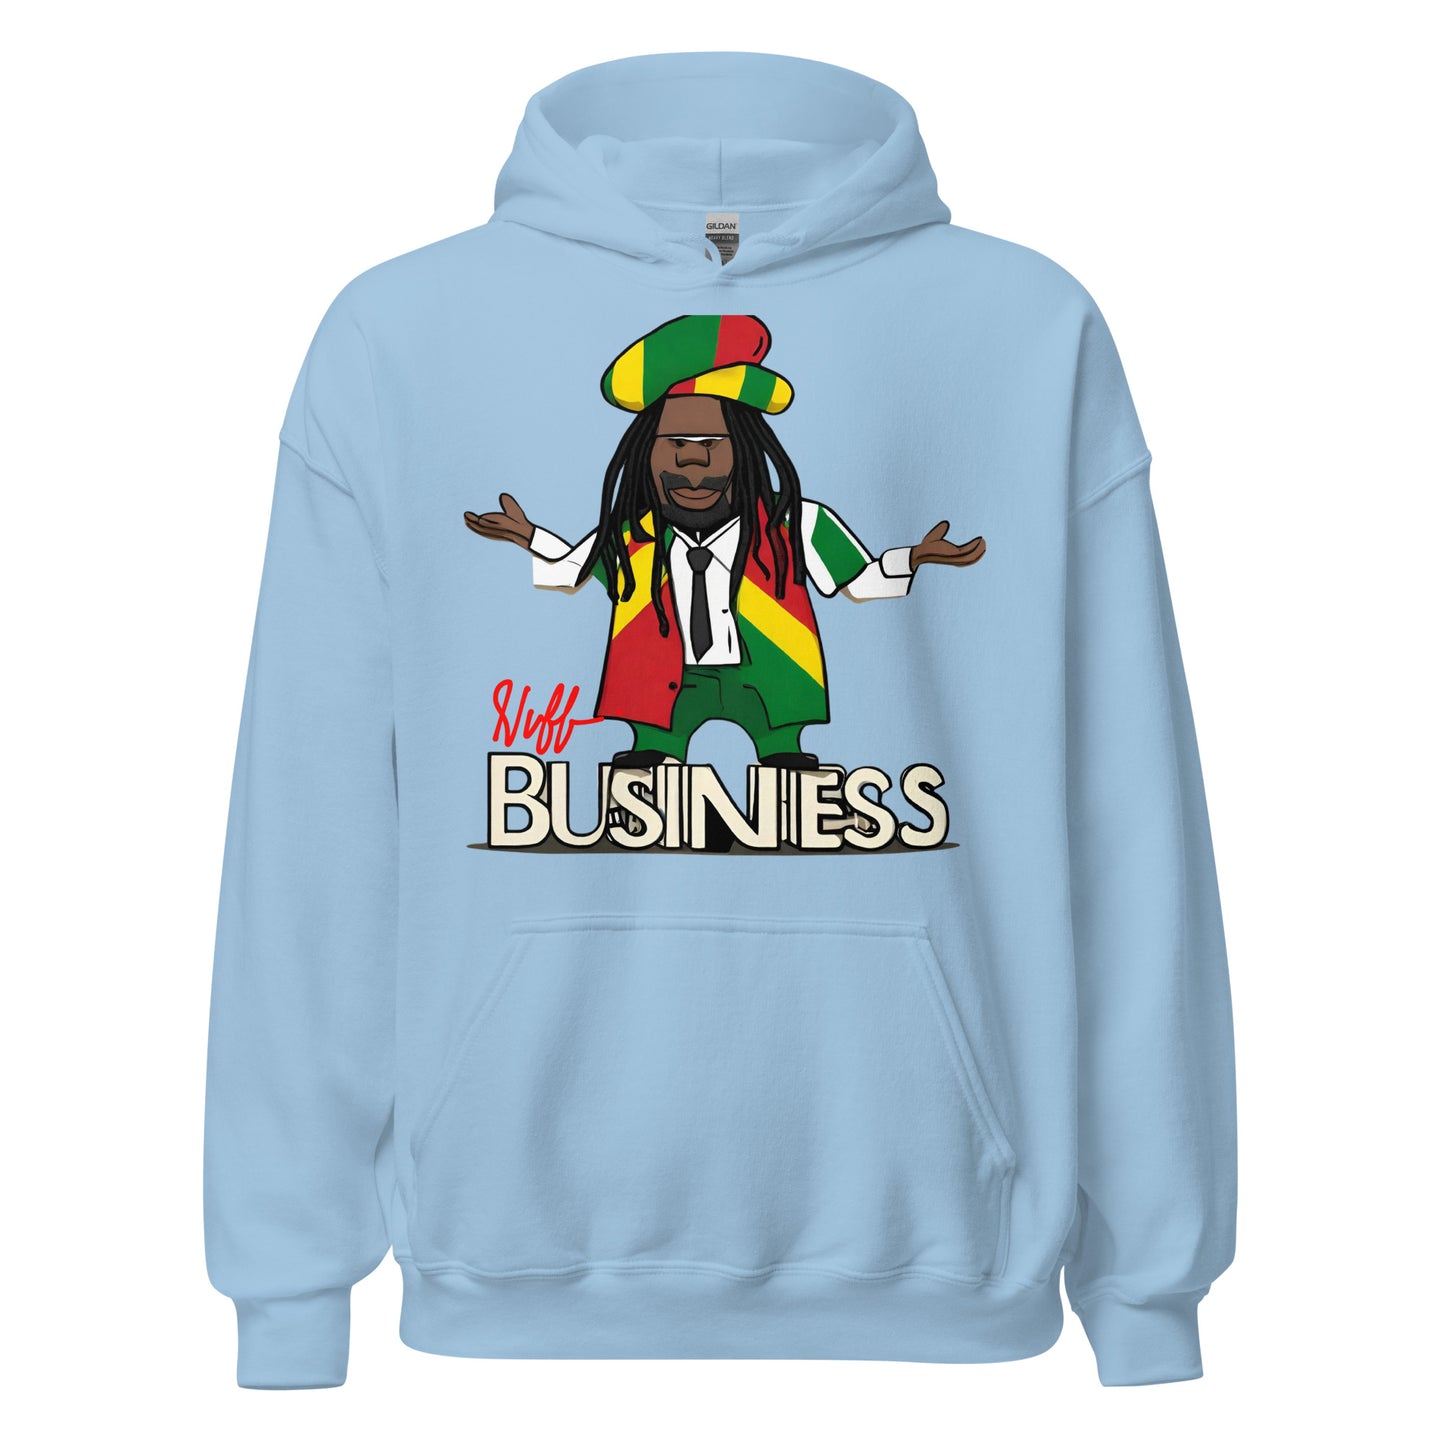 Stand on NUFF Business - Men's Hoodie (RN)